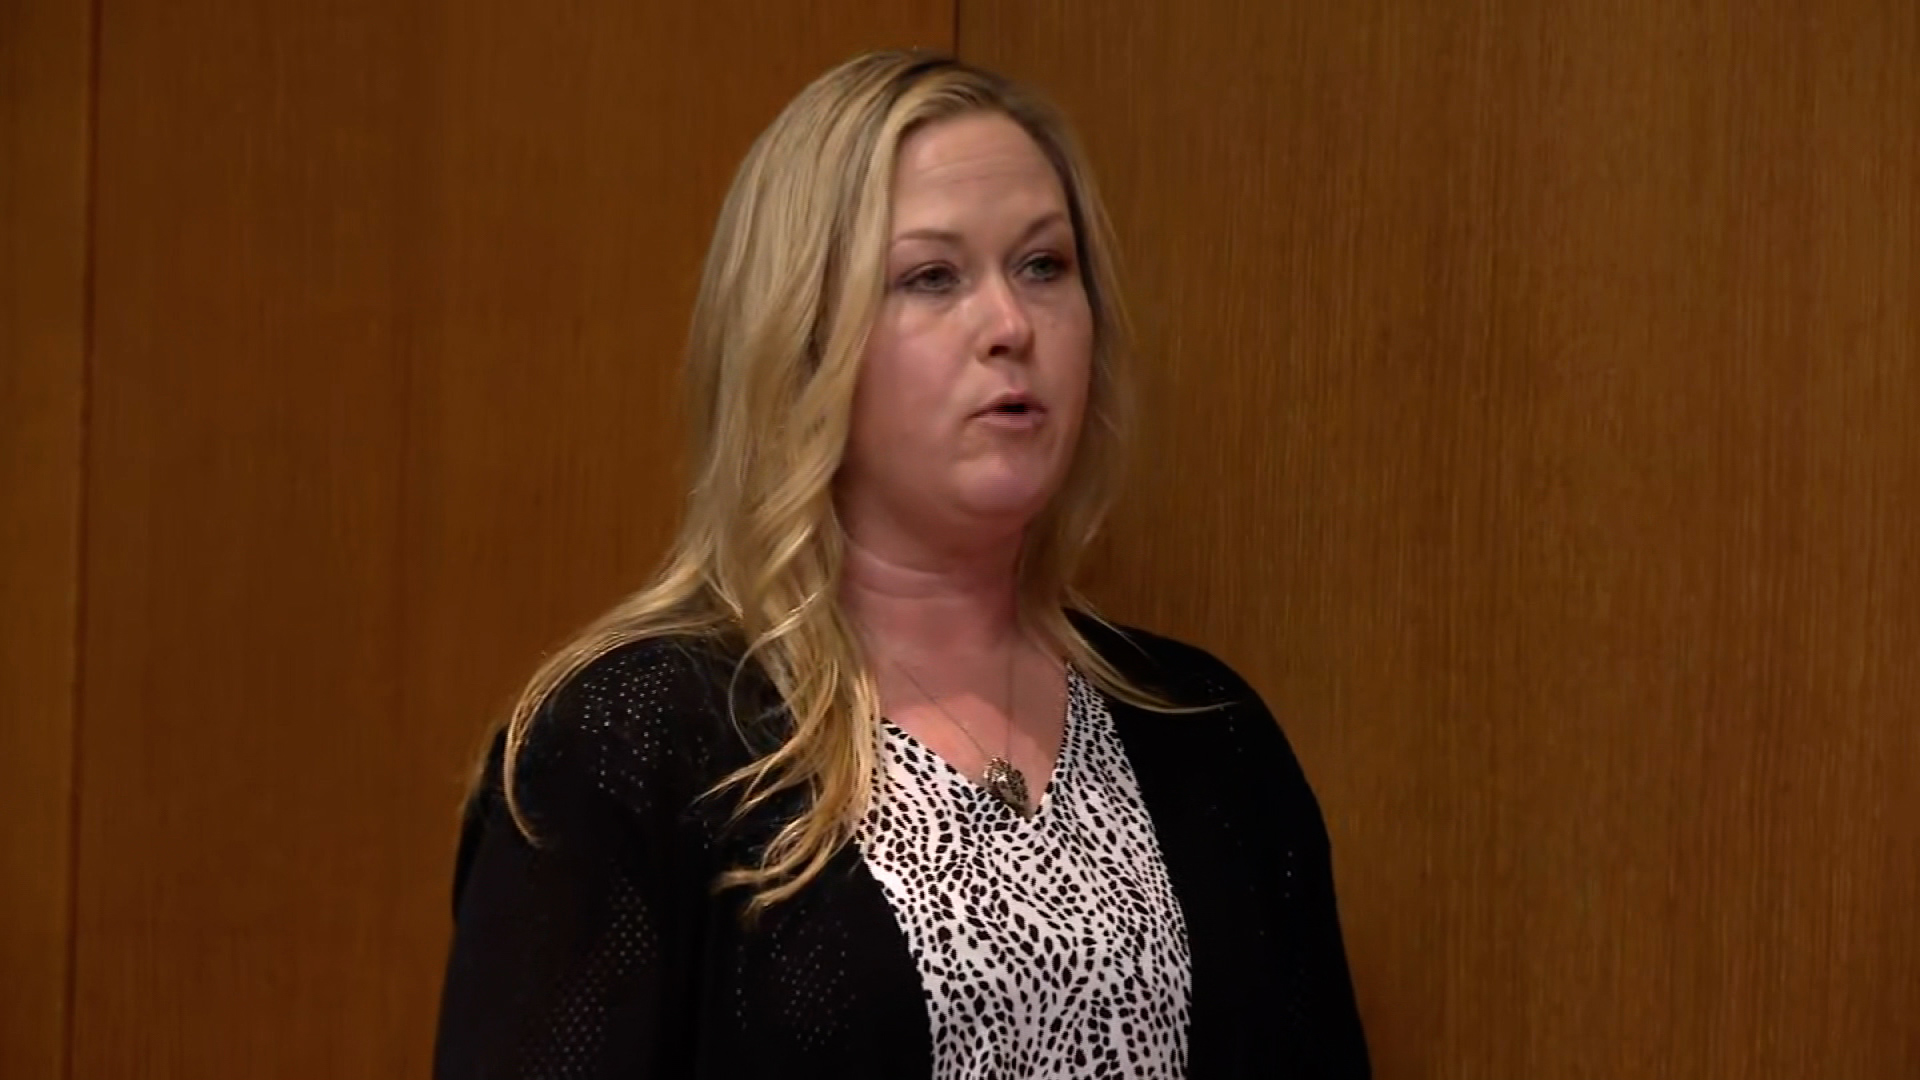 Jill Soave, the mother of Justin Shilling, gives a victim impact statement in court on Tuesday.